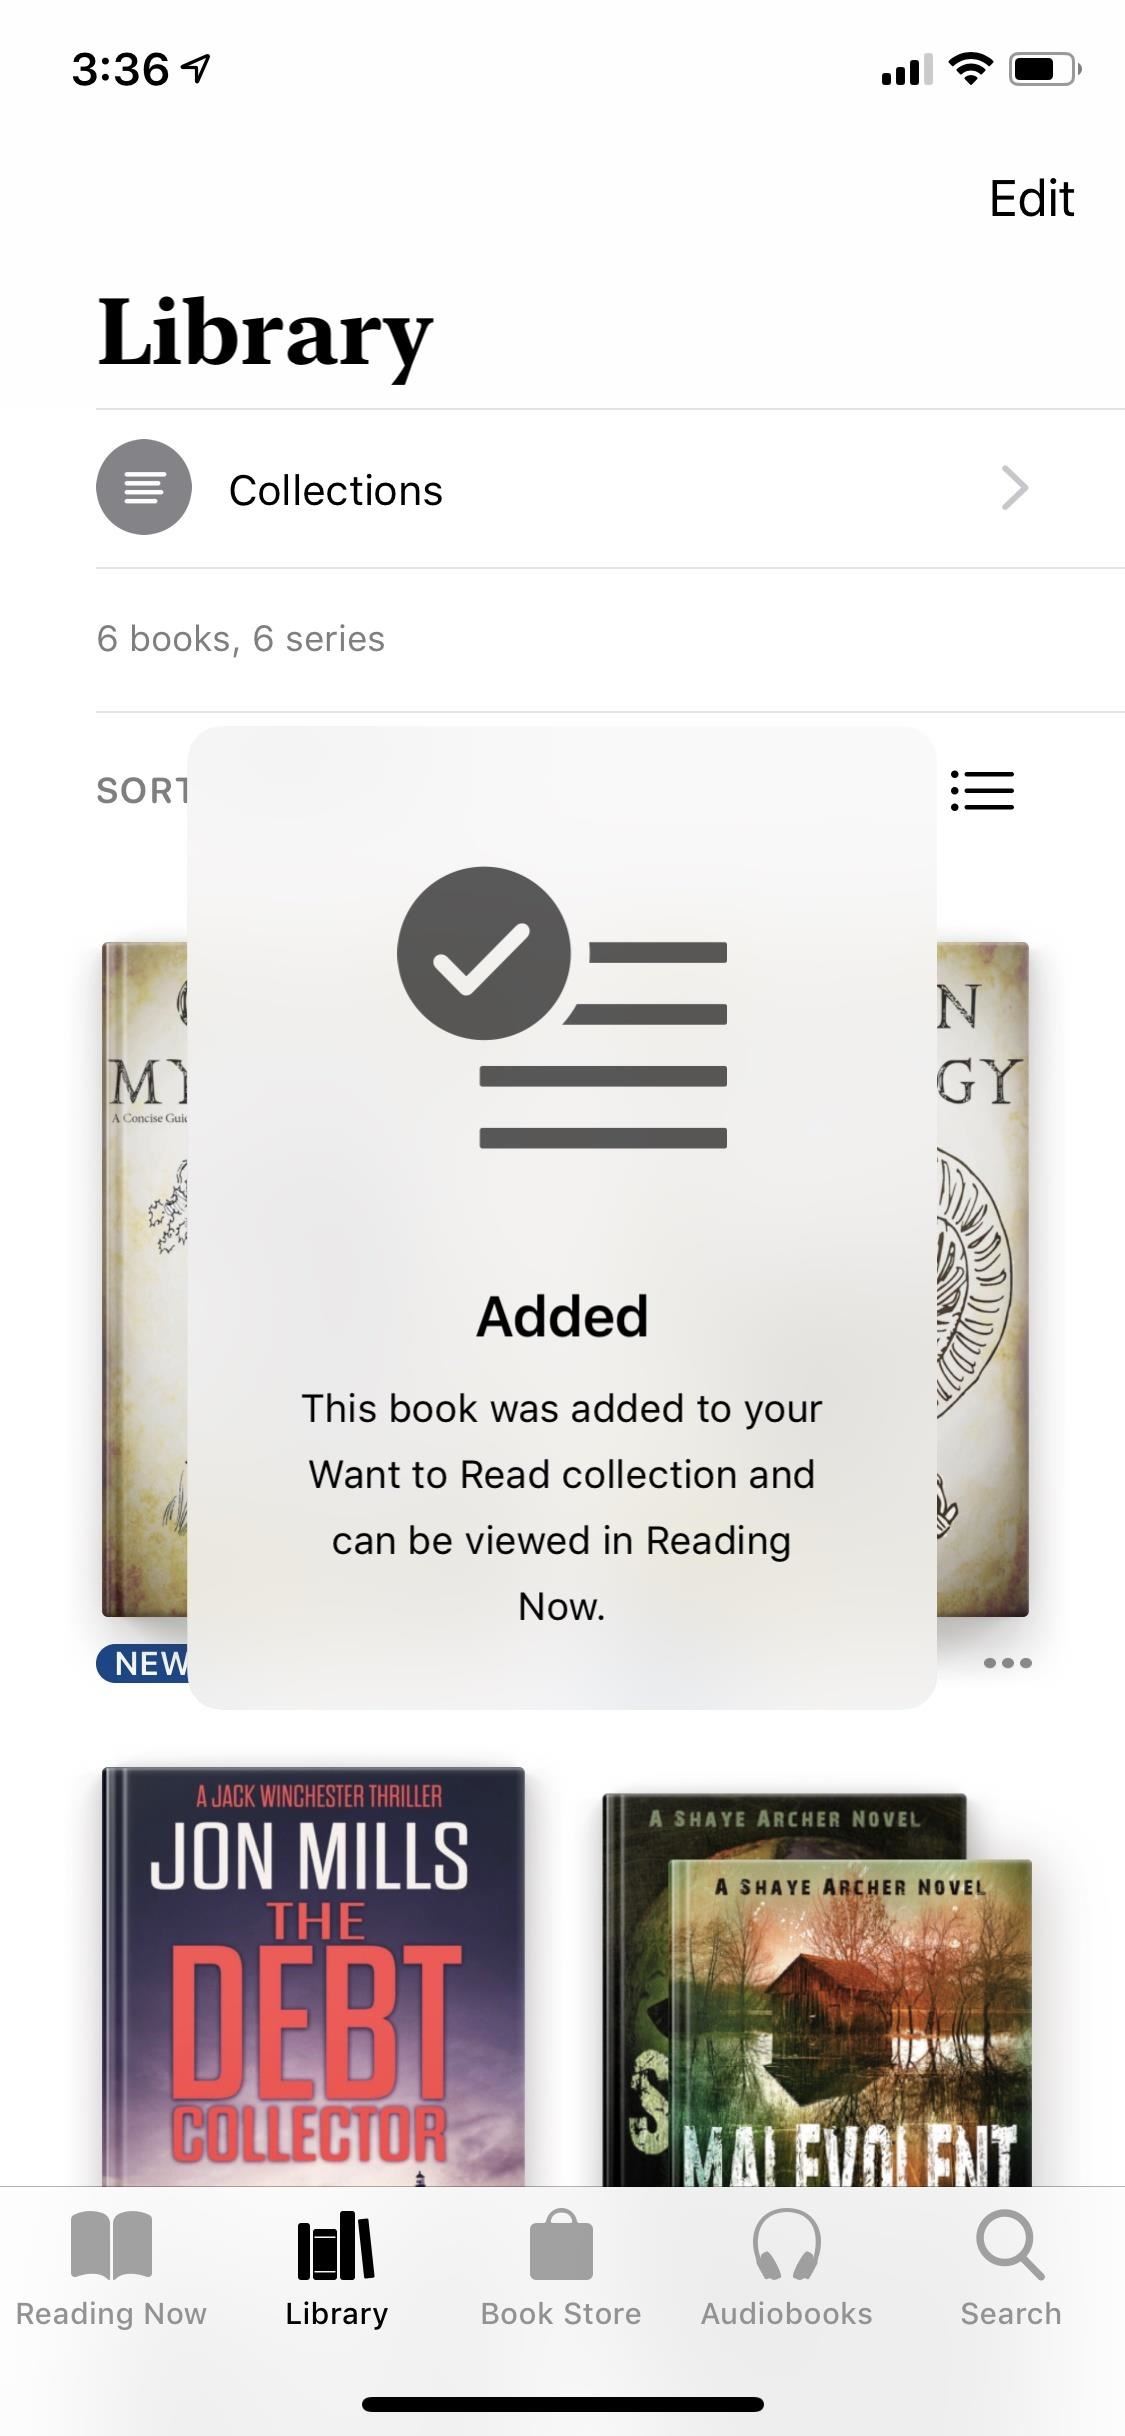 Apple Books in iOS 12 Finally Gives a 'Want to Read' Wish List for E-books & Audiobooks — Here's How It Works